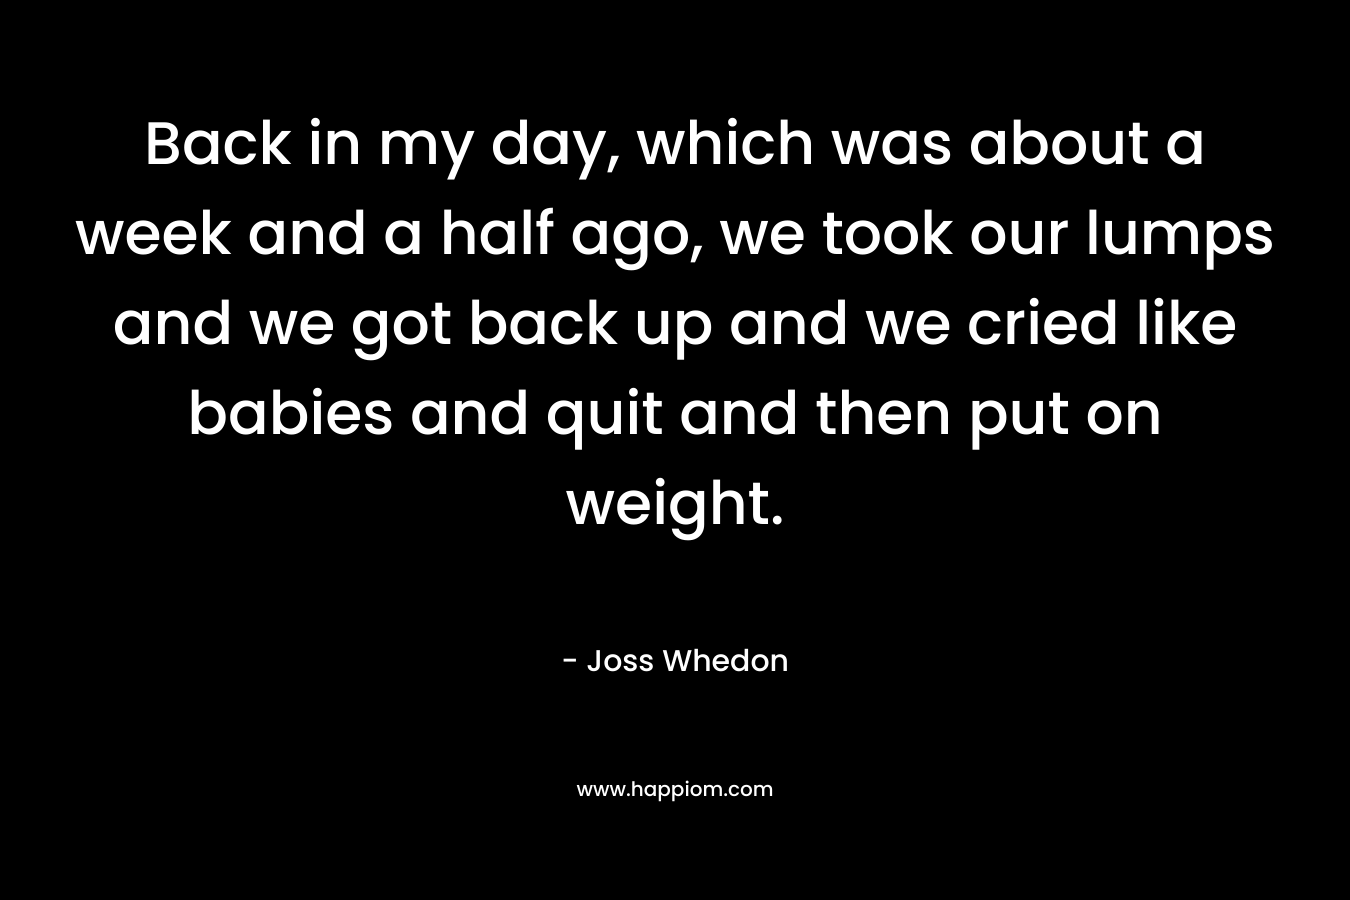 Back in my day, which was about a week and a half ago, we took our lumps and we got back up and we cried like babies and quit and then put on weight.